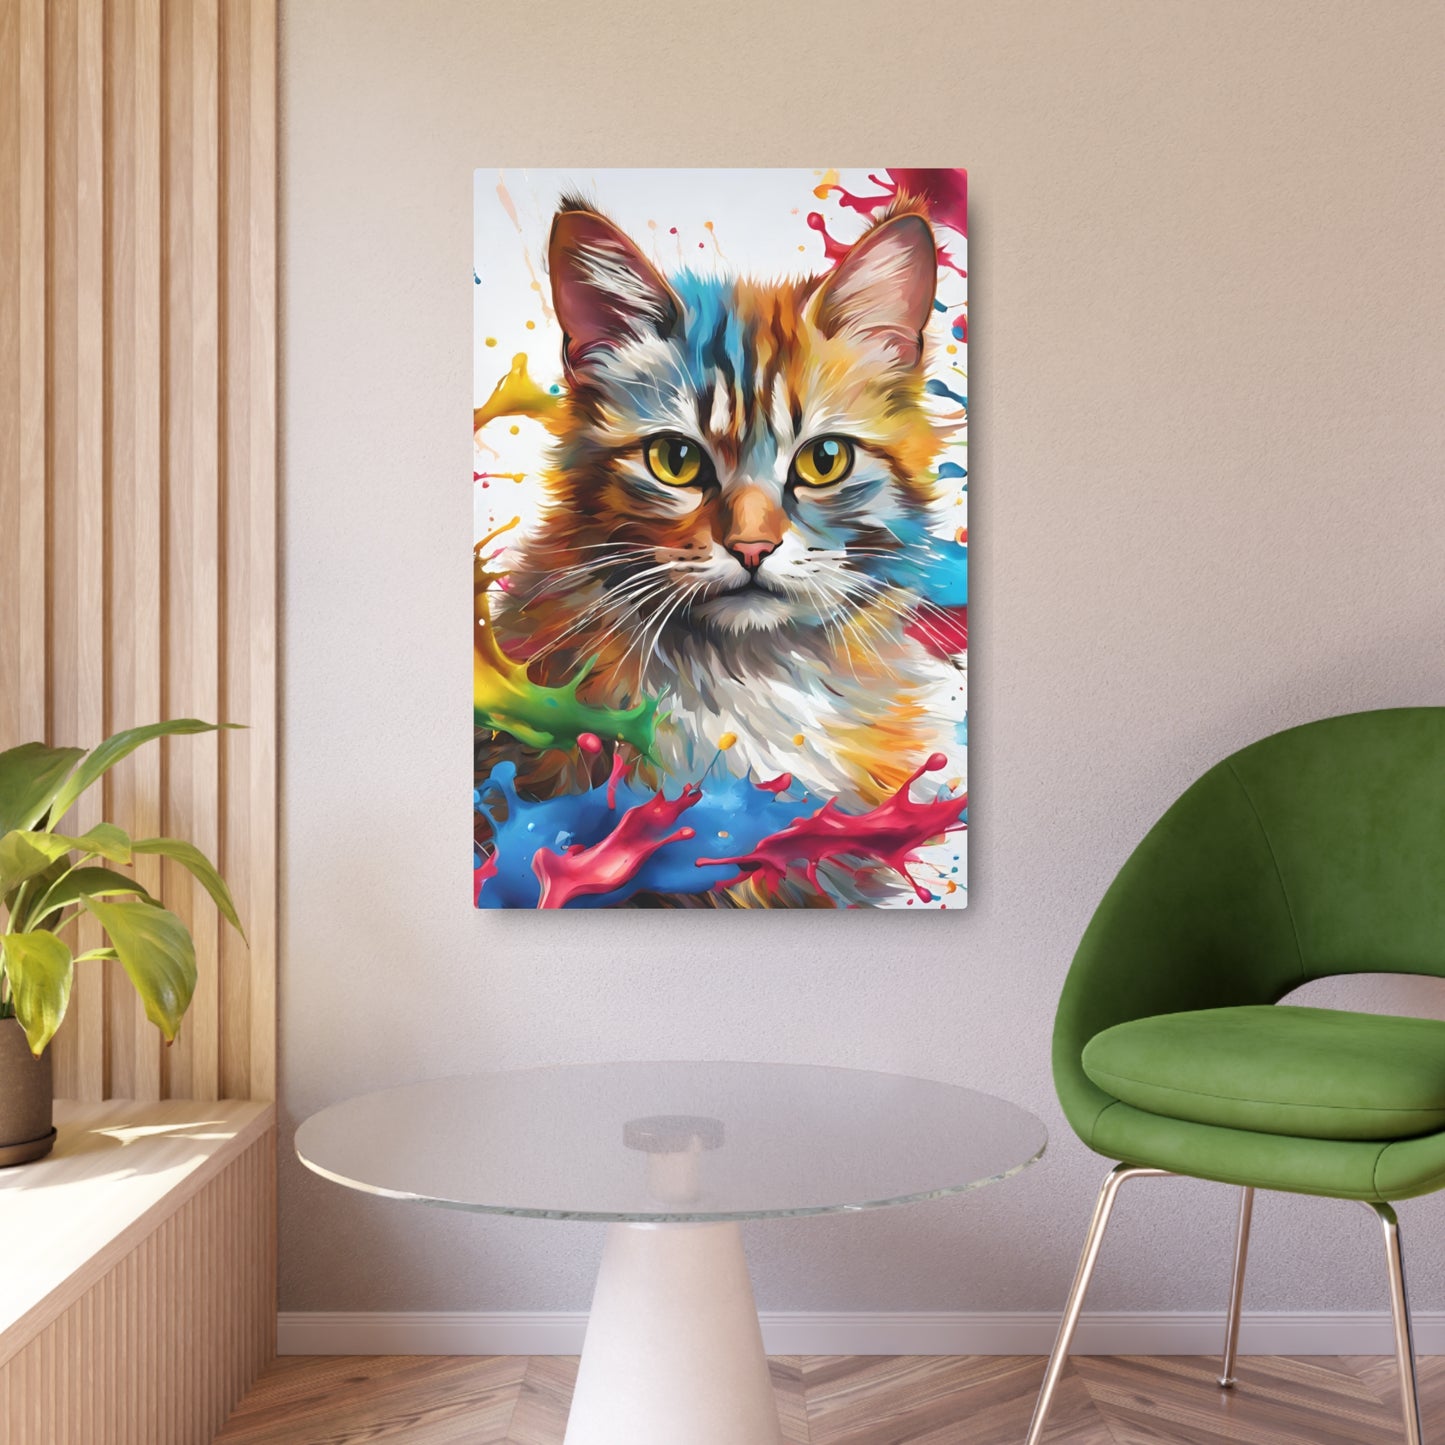 Metal Wall Art Decor featuring a Colorful Cat . Mounting tools included. Versatile Home Decor.